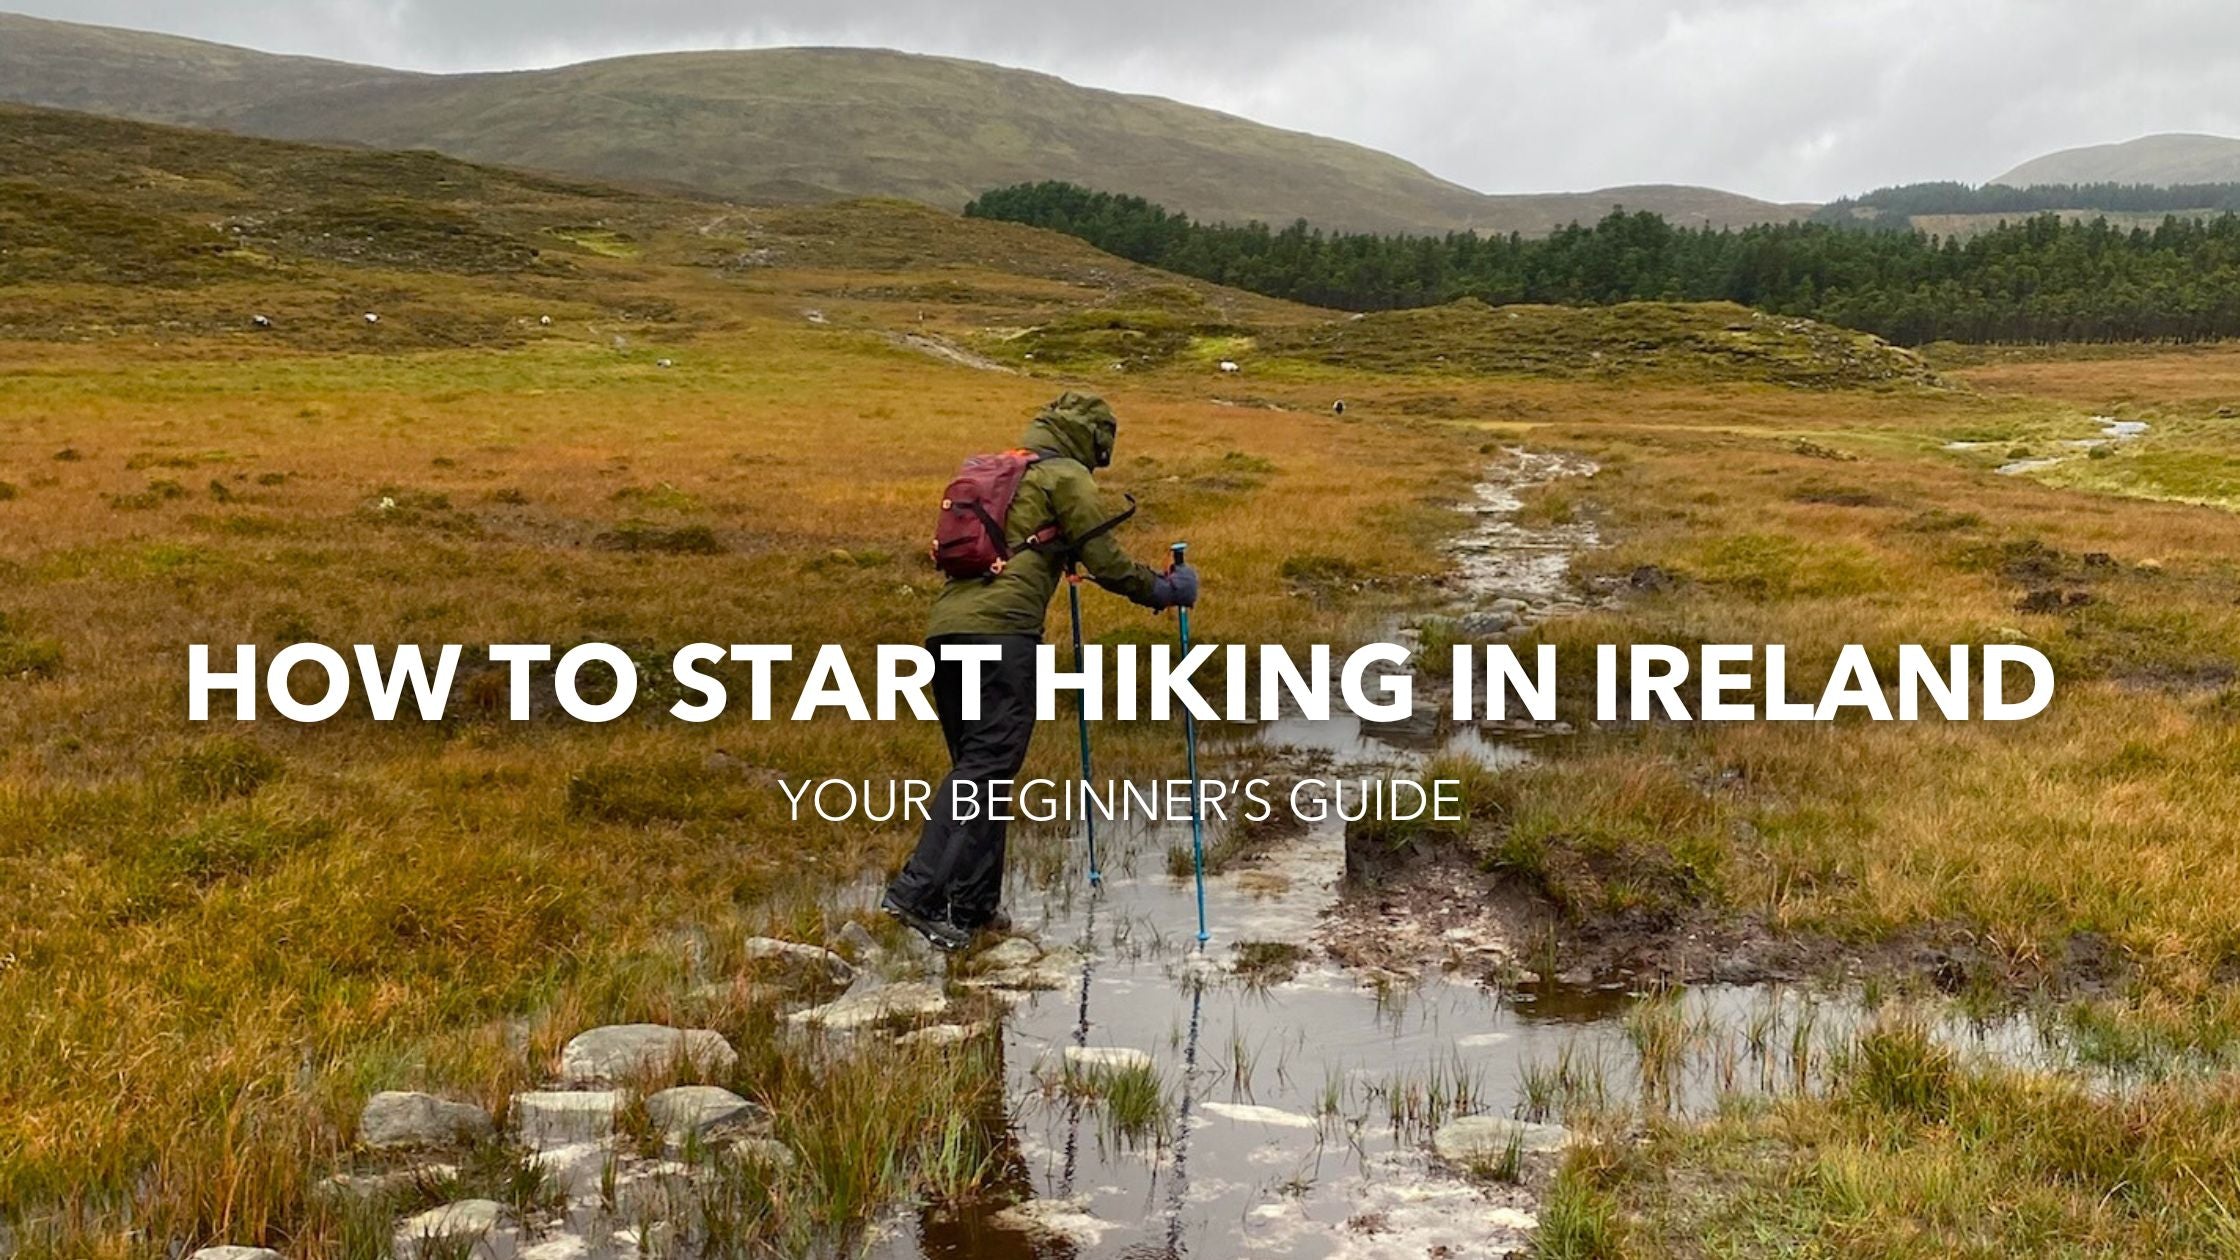 How to Start Hiking in Ireland- A Beginner's Guide